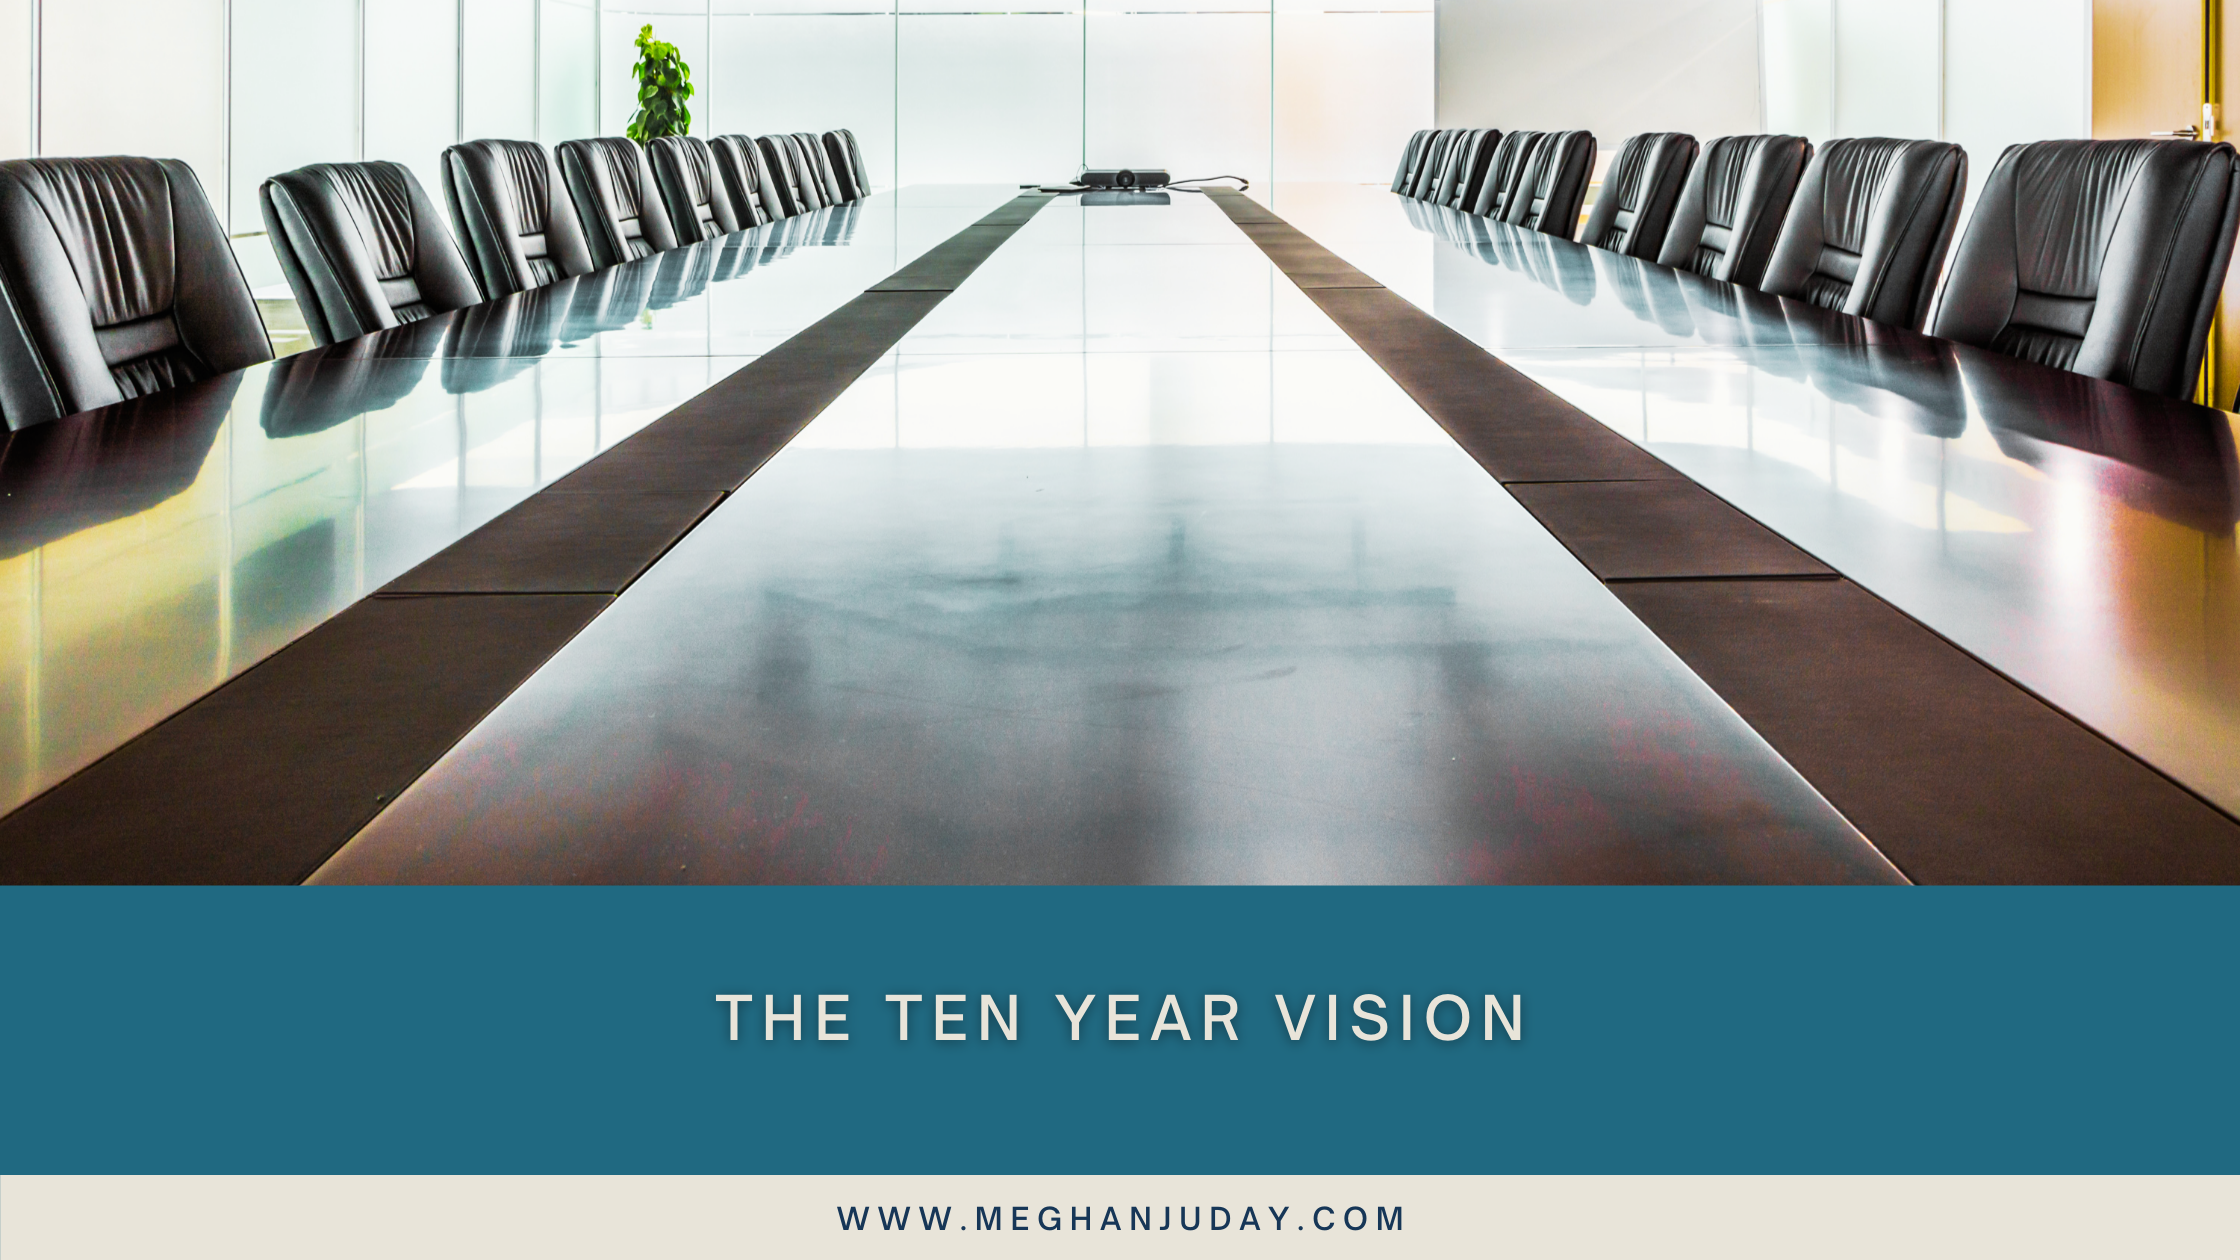 The Ten Year Vision